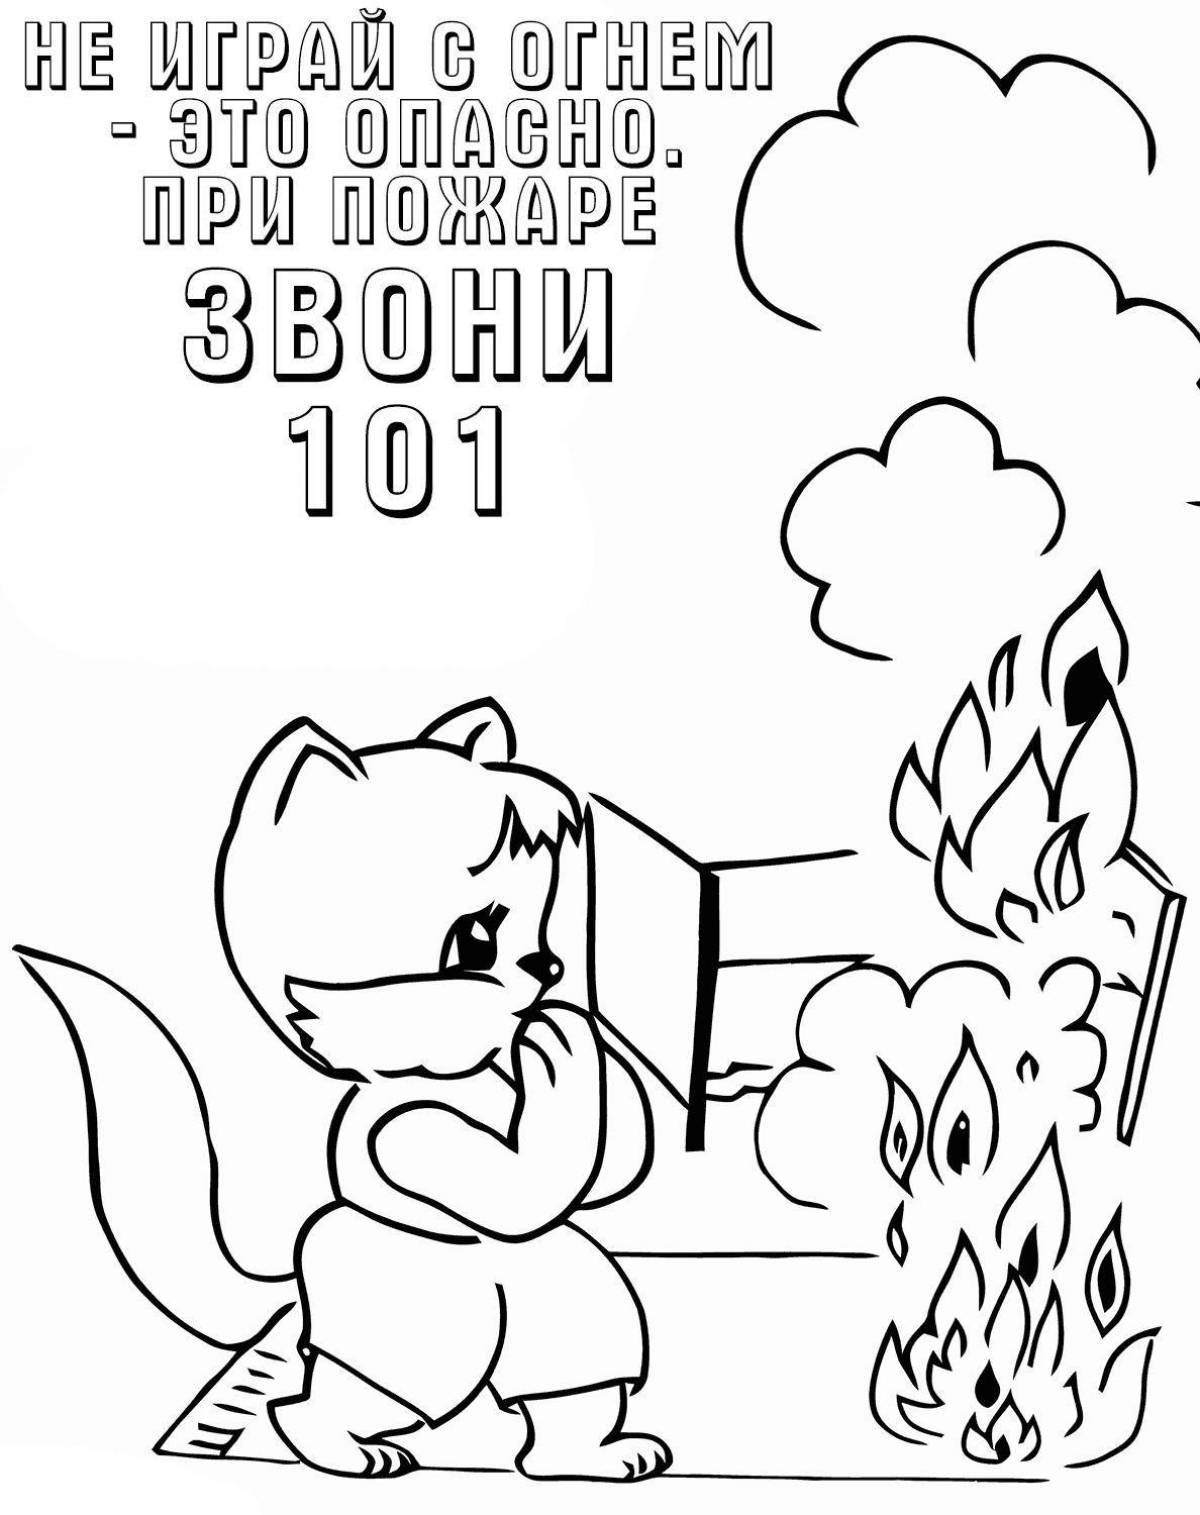 Bright coloring book fire safety for schoolchildren